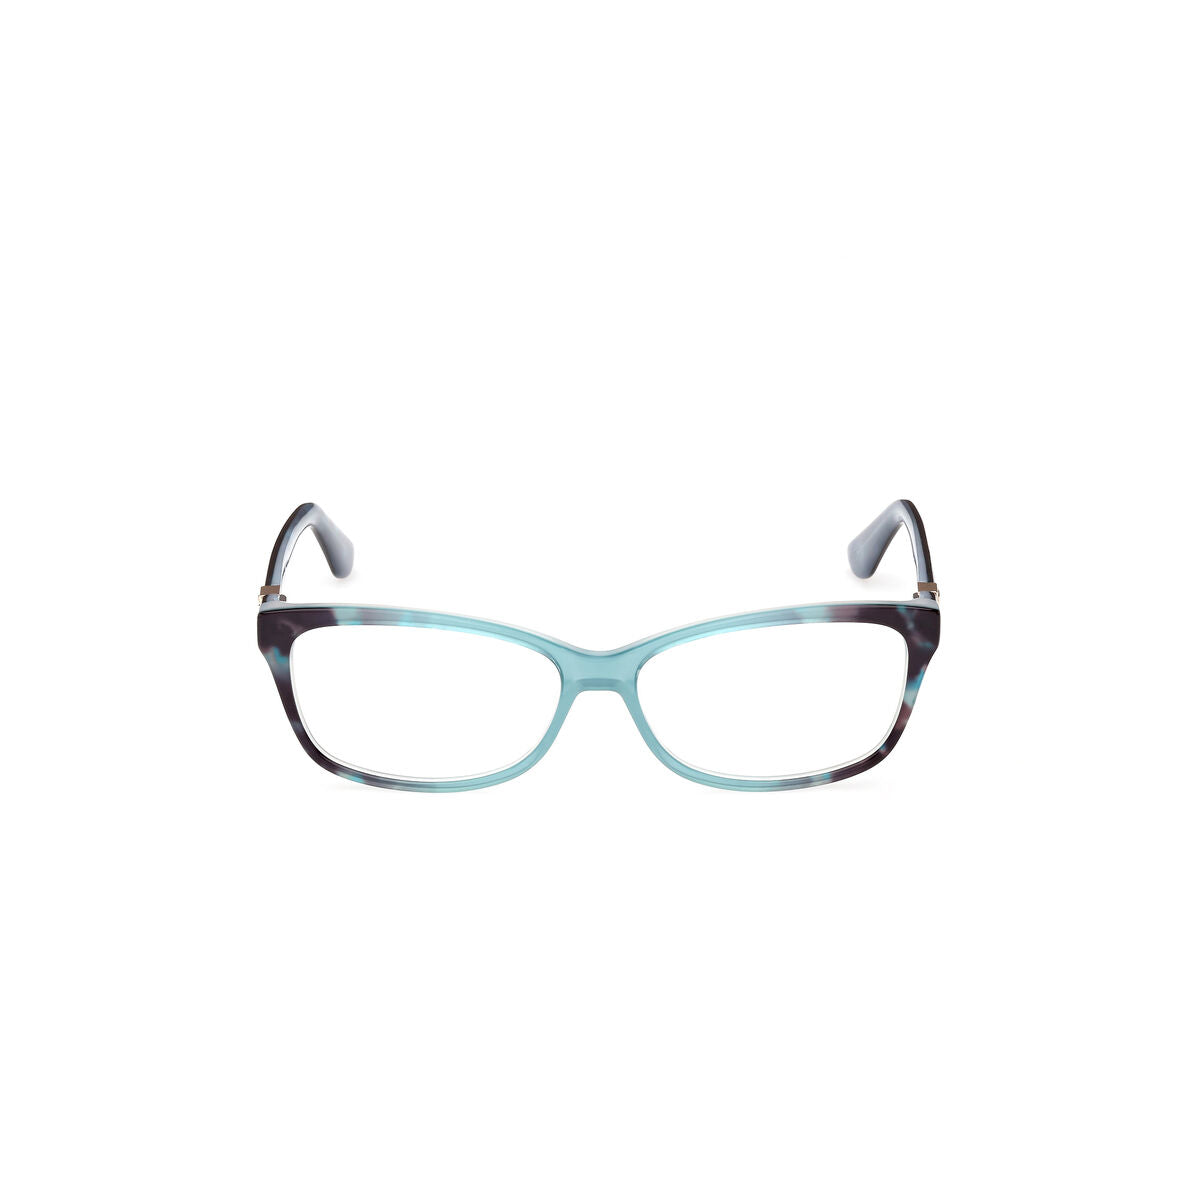 Ladies' Spectacle frame Guess GU2948-56089 Turquoise